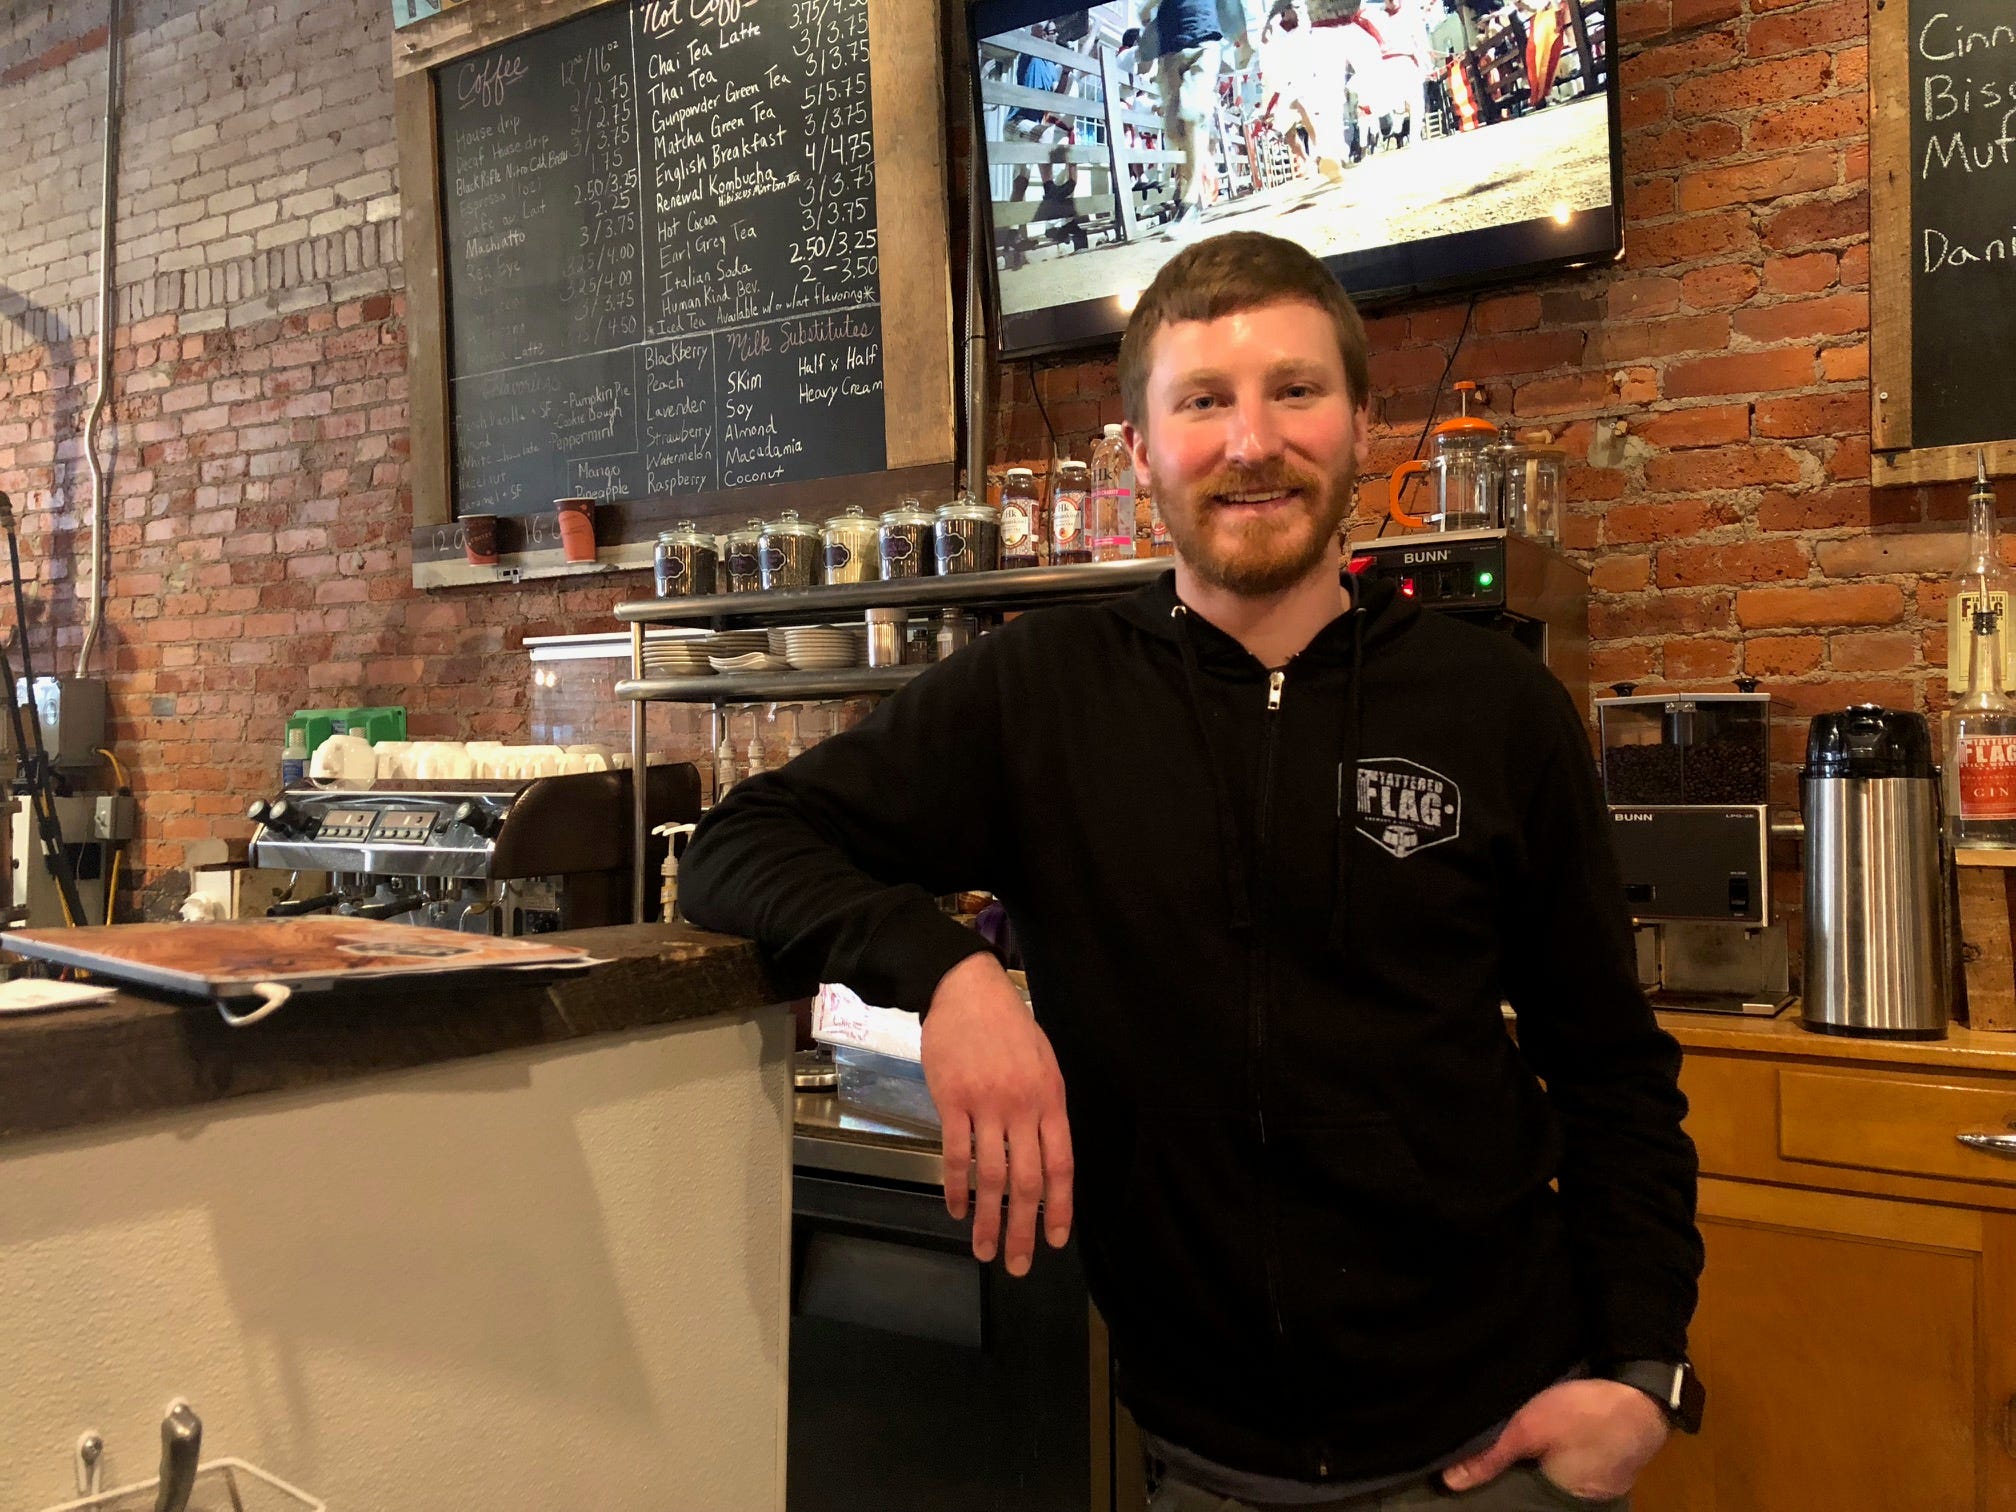 Brian Lewis, who runs the Nuclear Bean coffee shop, in Middletown, talks about living and working near the Three Mile Island nuclear plant, about 3 miles away.

"People are really uneducated in terms of nuclear power," he said, adding that he's confident in the safety of the plant — Middletown, Friday, March 8, 2019. (Photo by: Lindsay C. VanAsdalan)